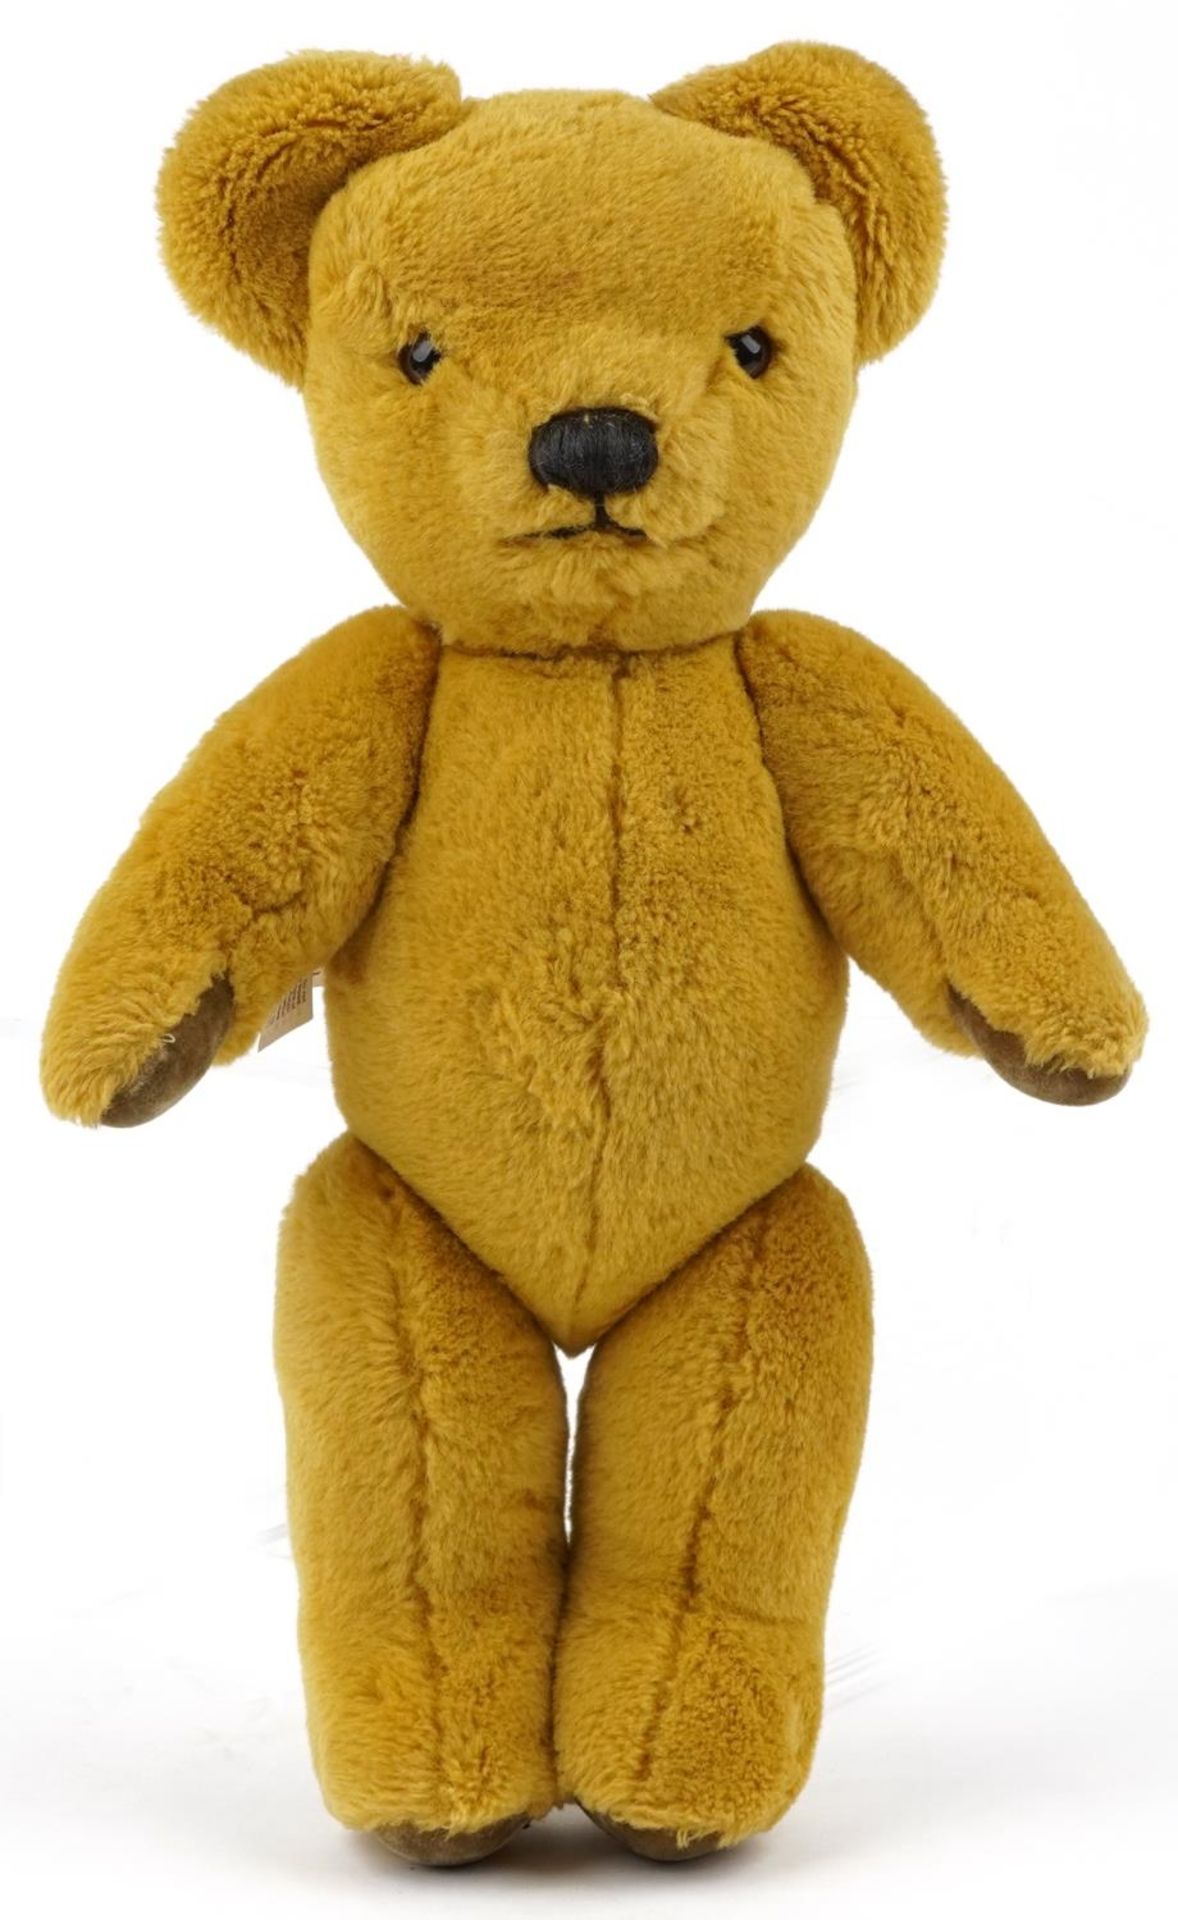 Vintage Merrythought teddy bear with jointed limbs, 39cm in length